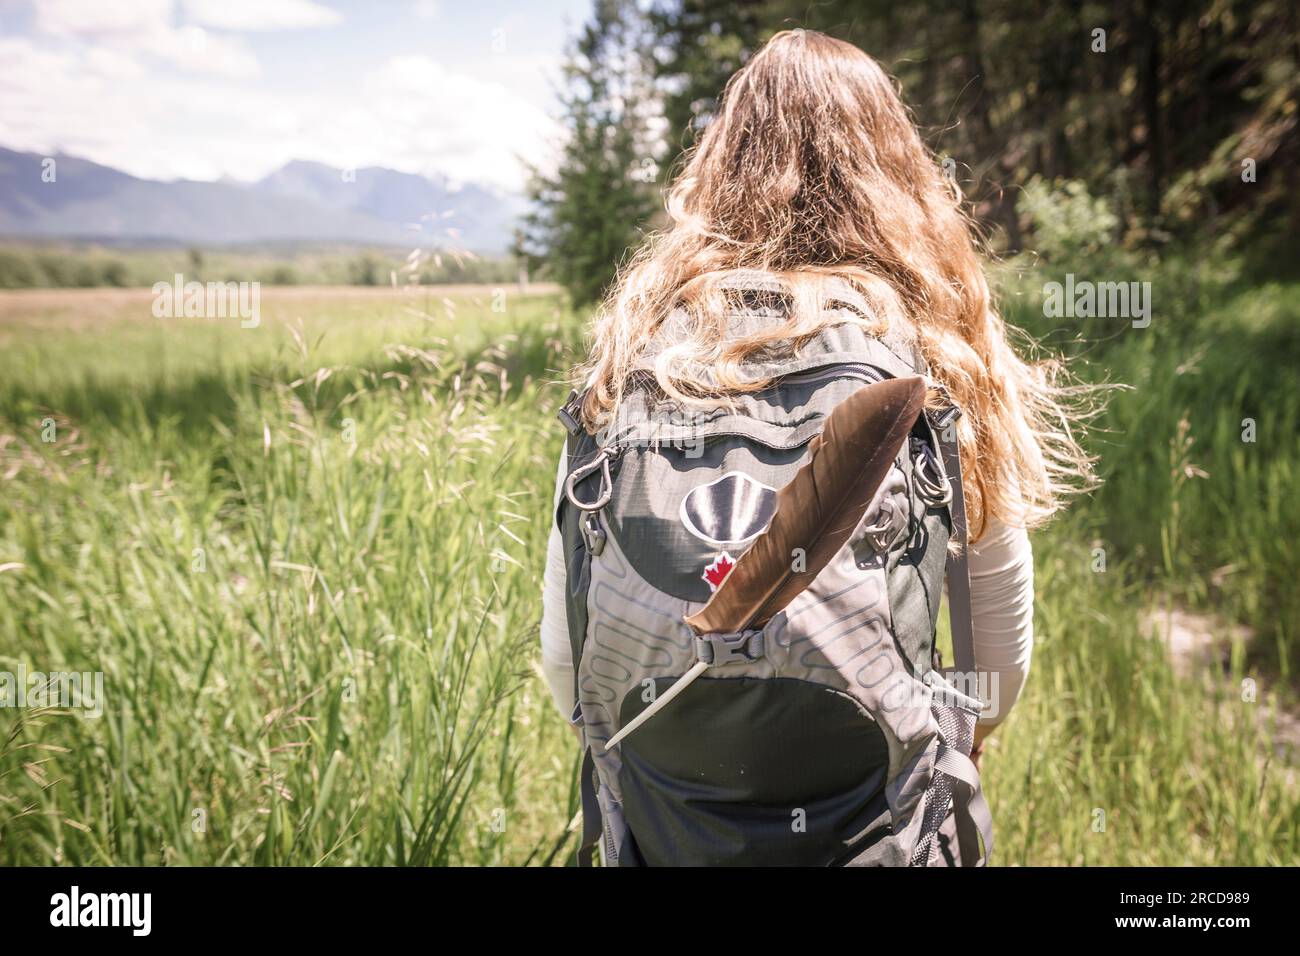 Women with blonde hair and backpack with feather hiking in Canada Stock Photo